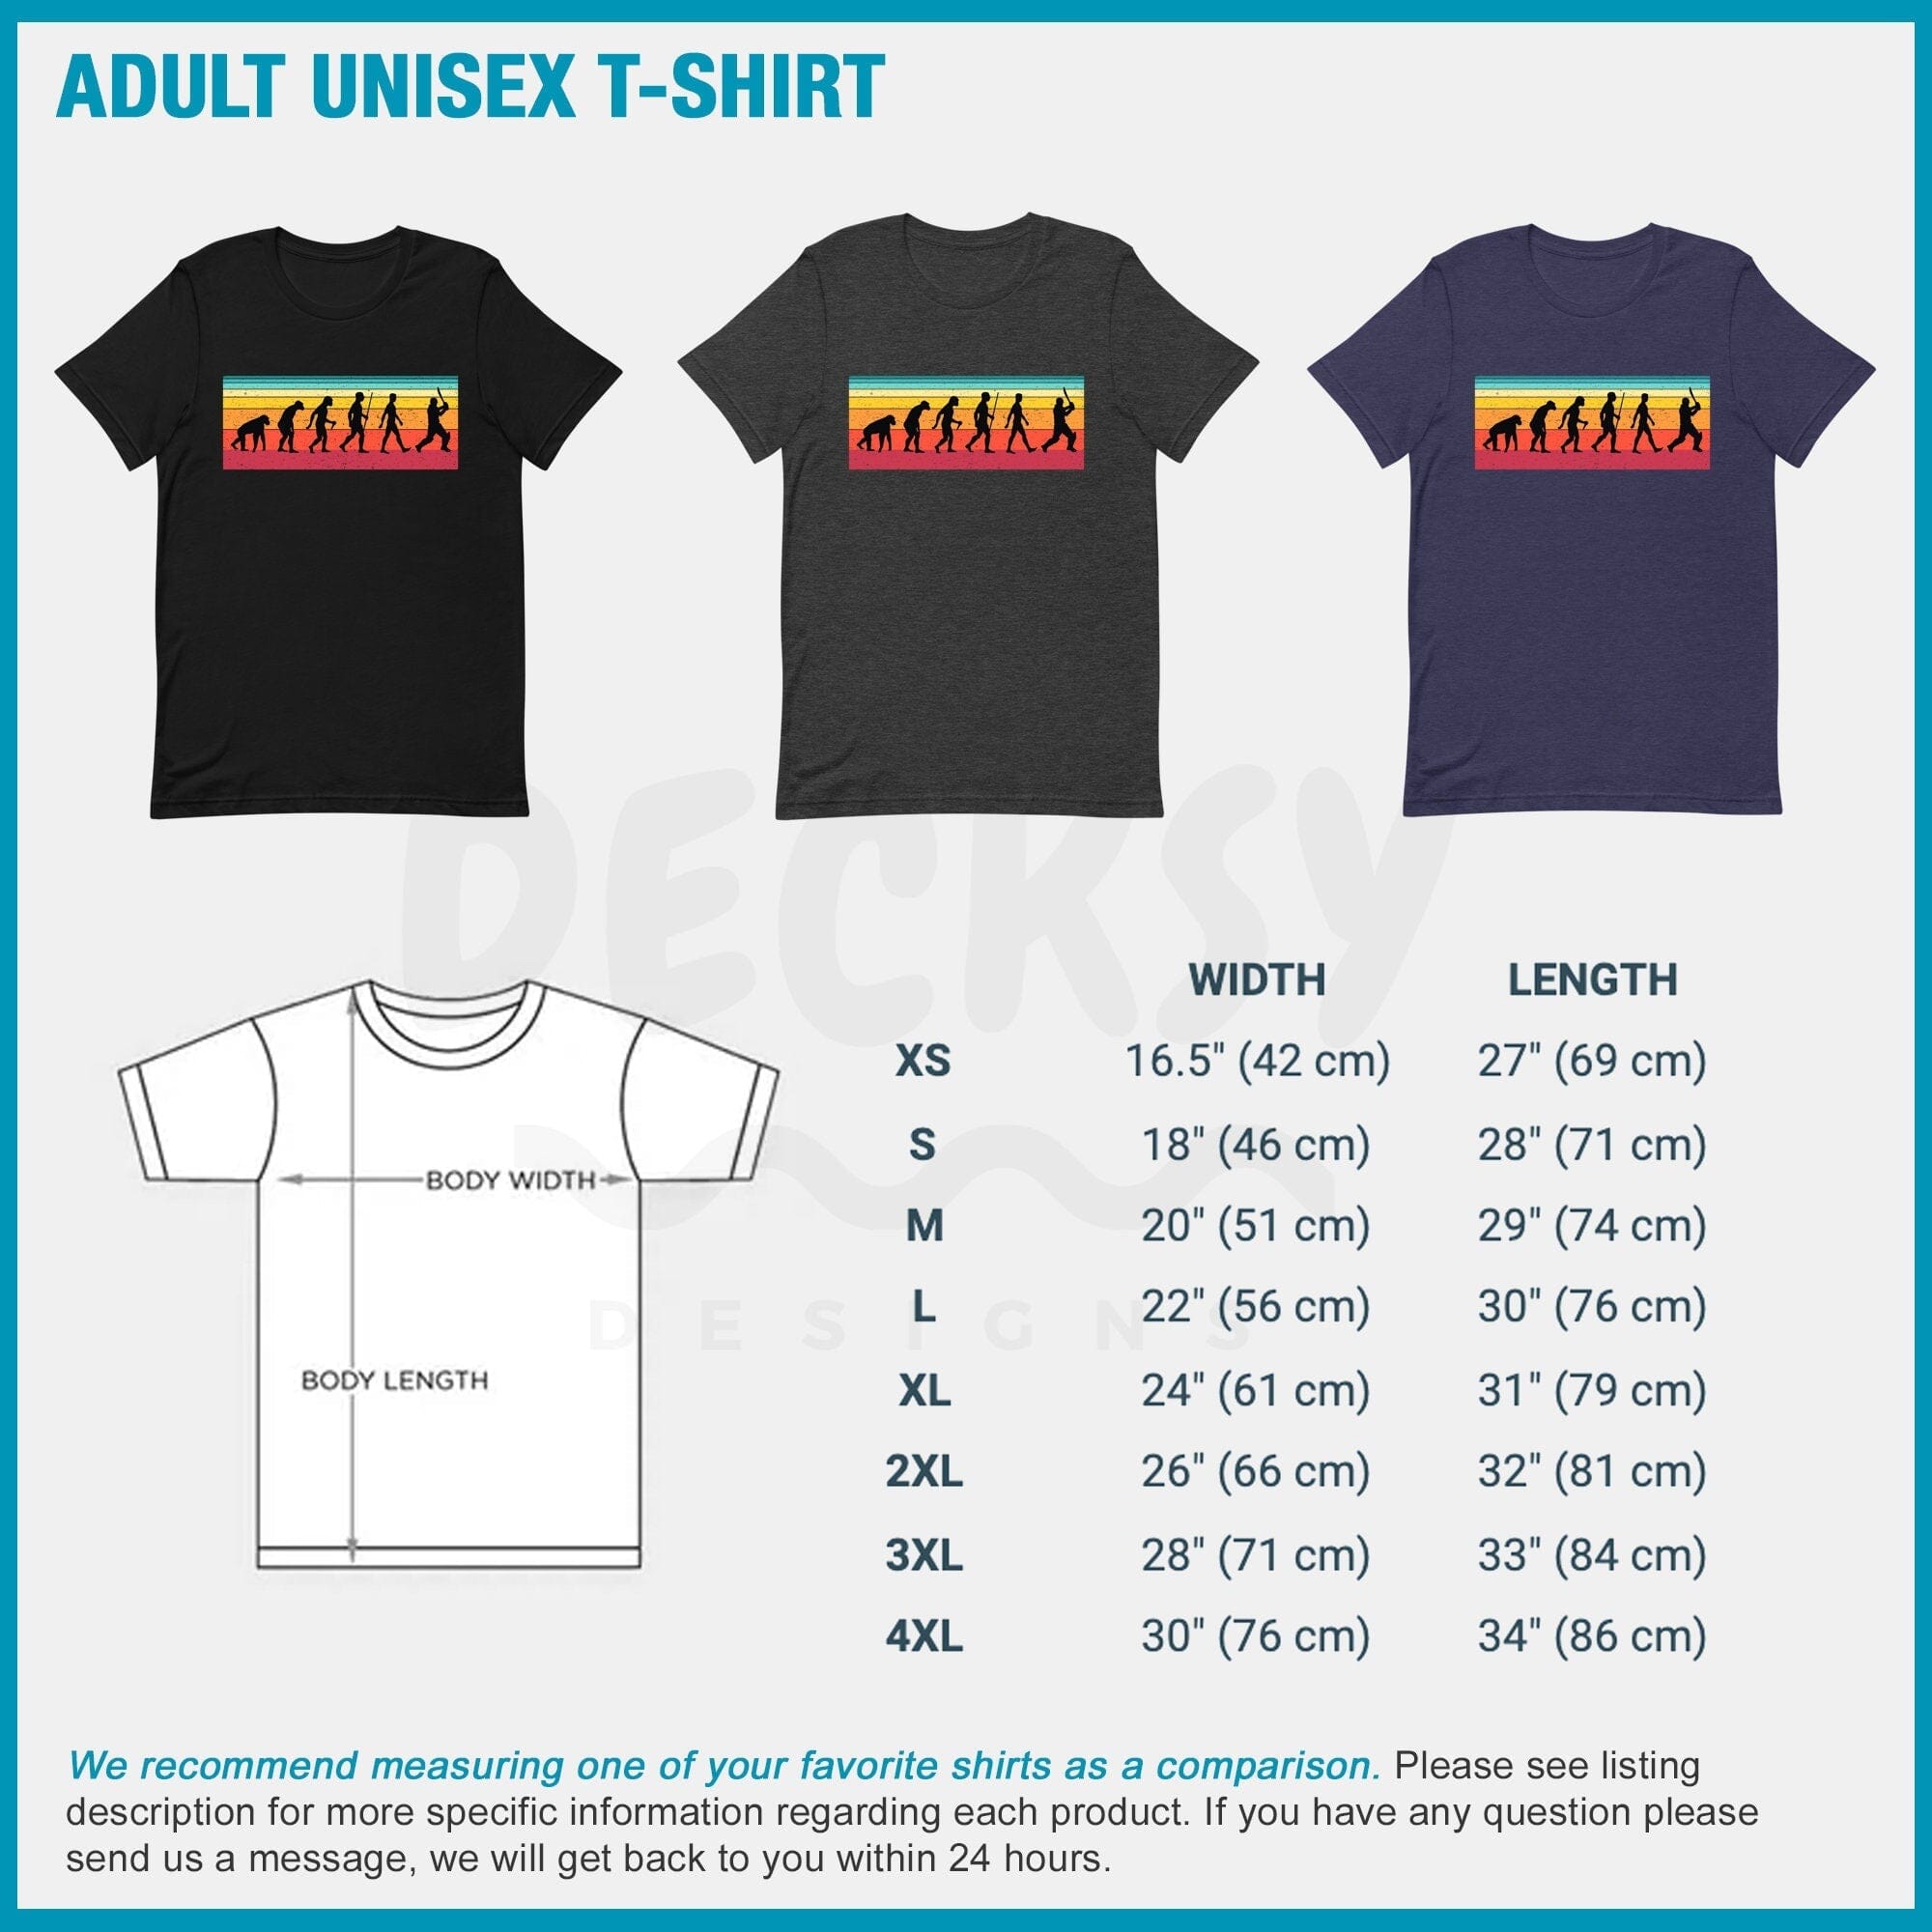 Cricket Player Shirt, Gift for Cricket Lover-Clothing:Gender-Neutral Adult Clothing:Tops & Tees:T-shirts:Graphic Tees-DecksyDesigns